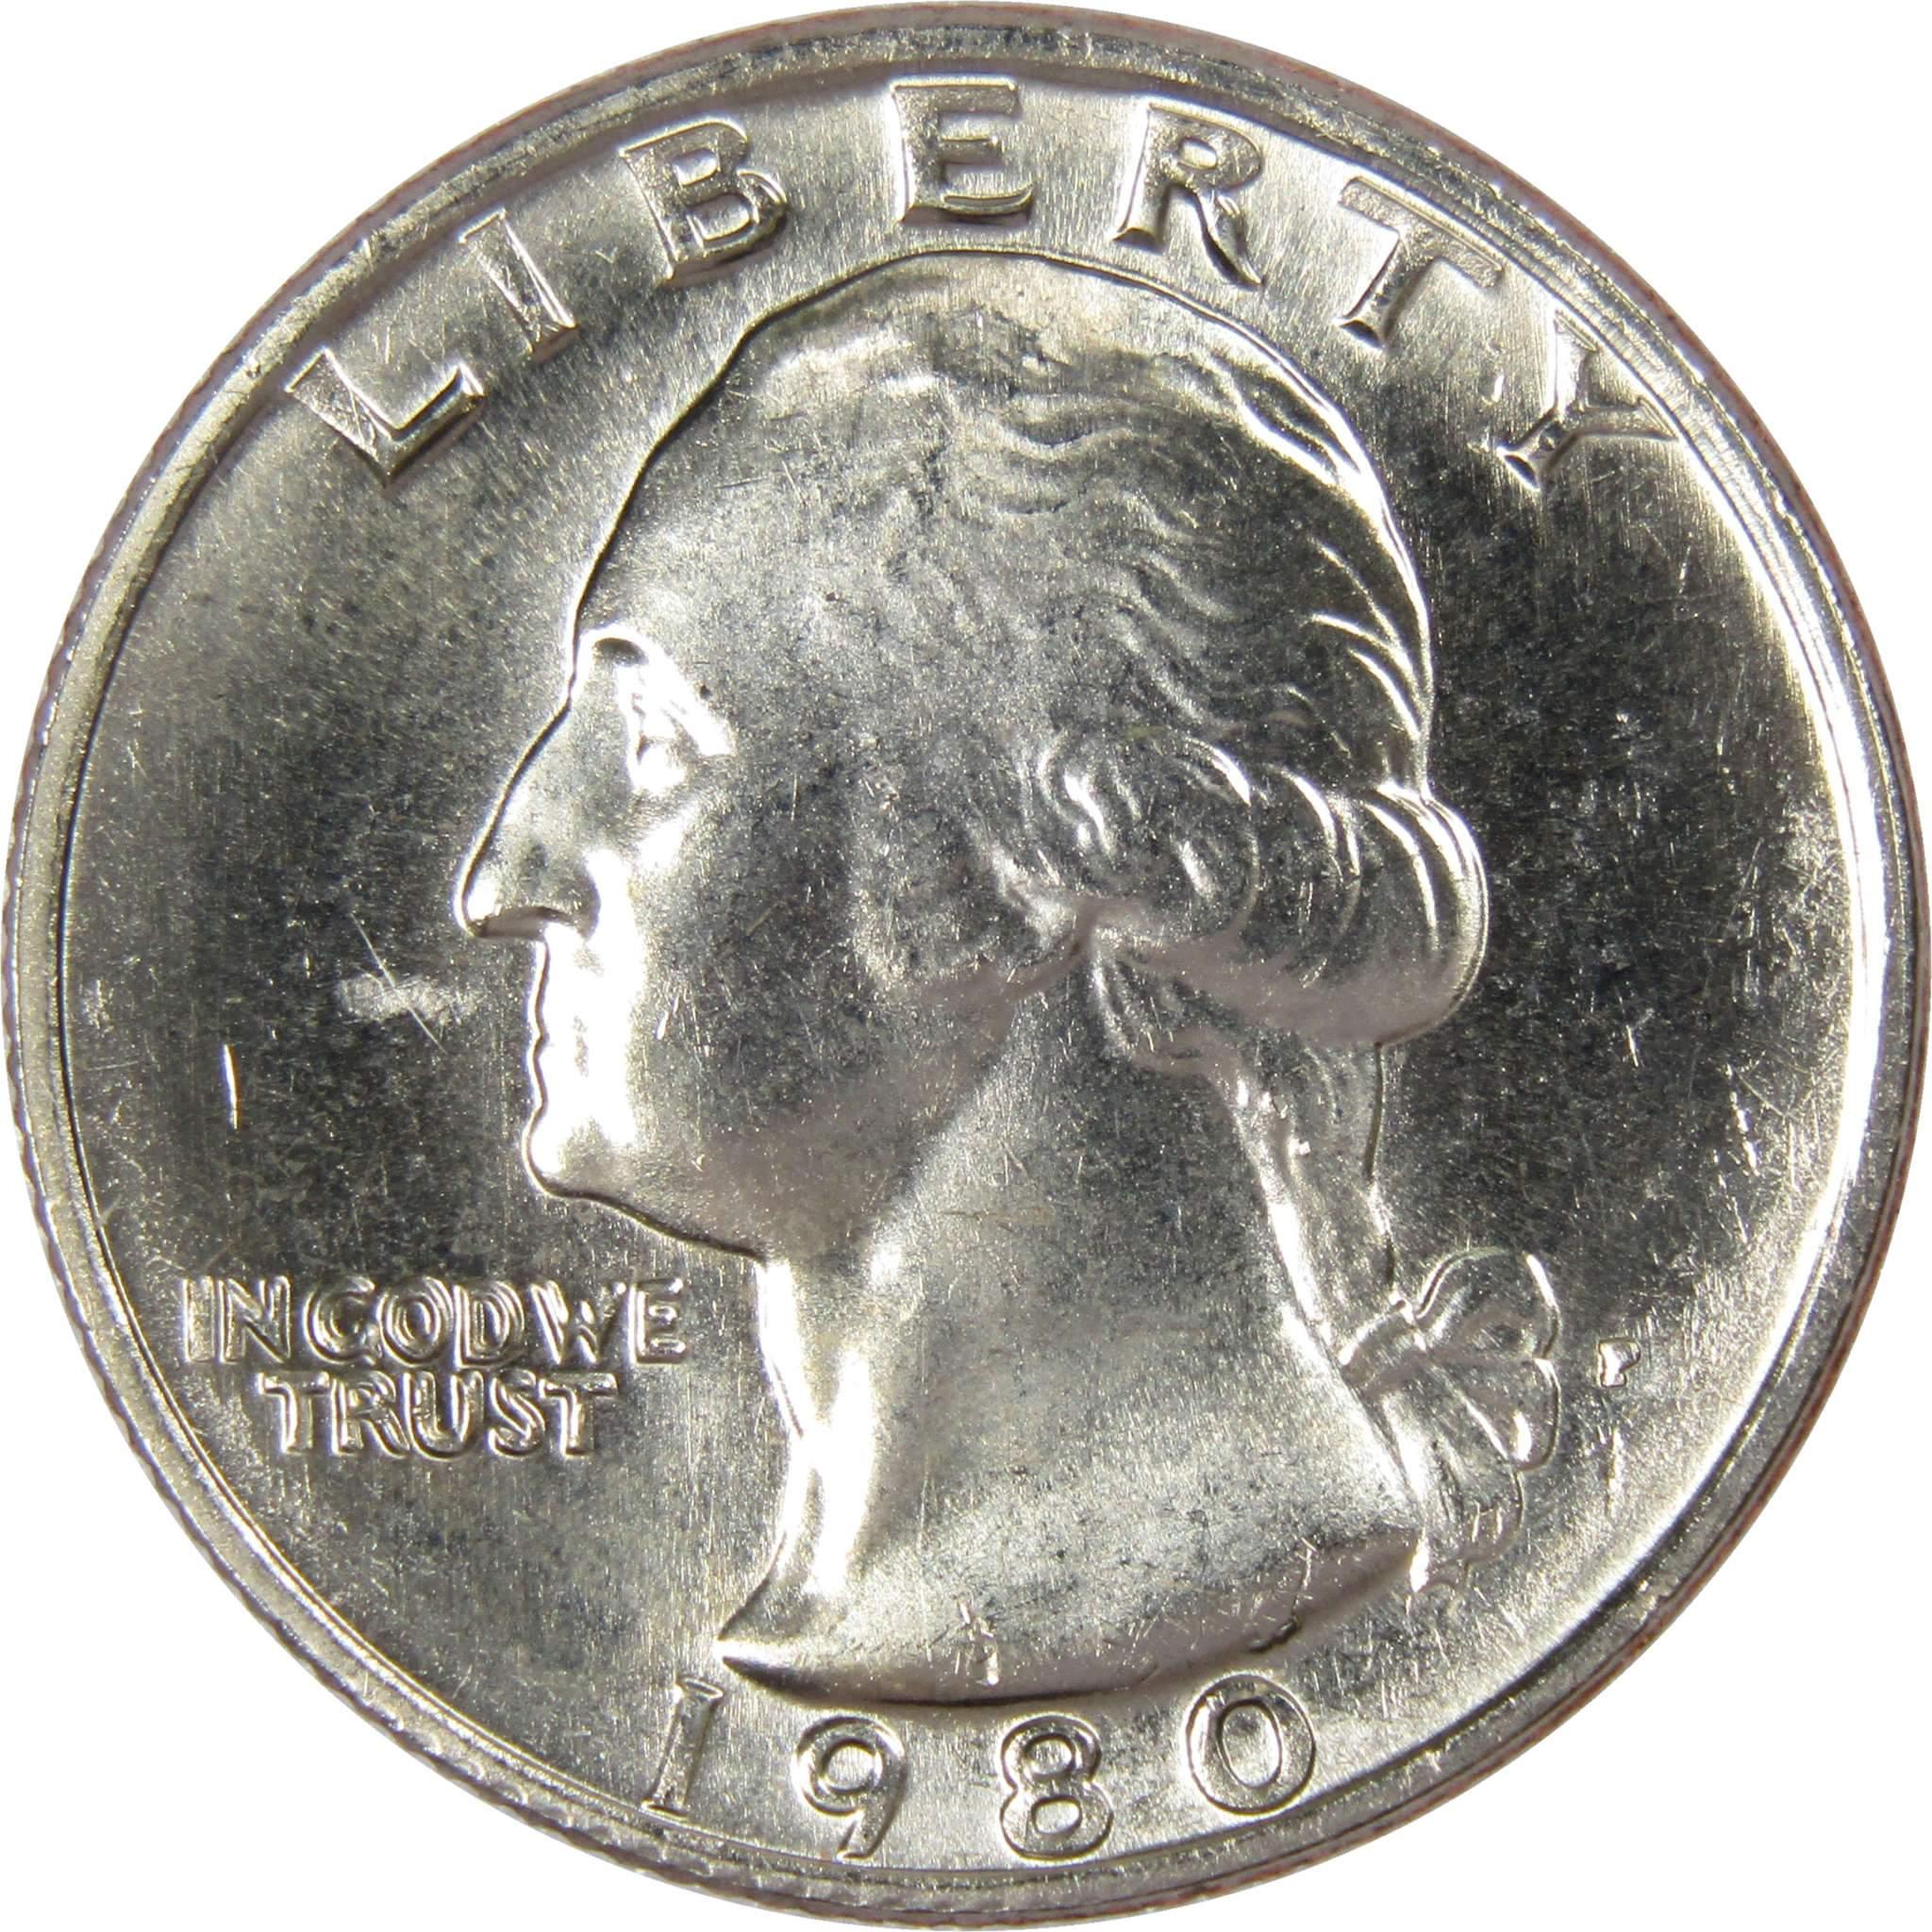 1980 P Washington Quarter BU Uncirculated Mint State 25c US Coin Collectible